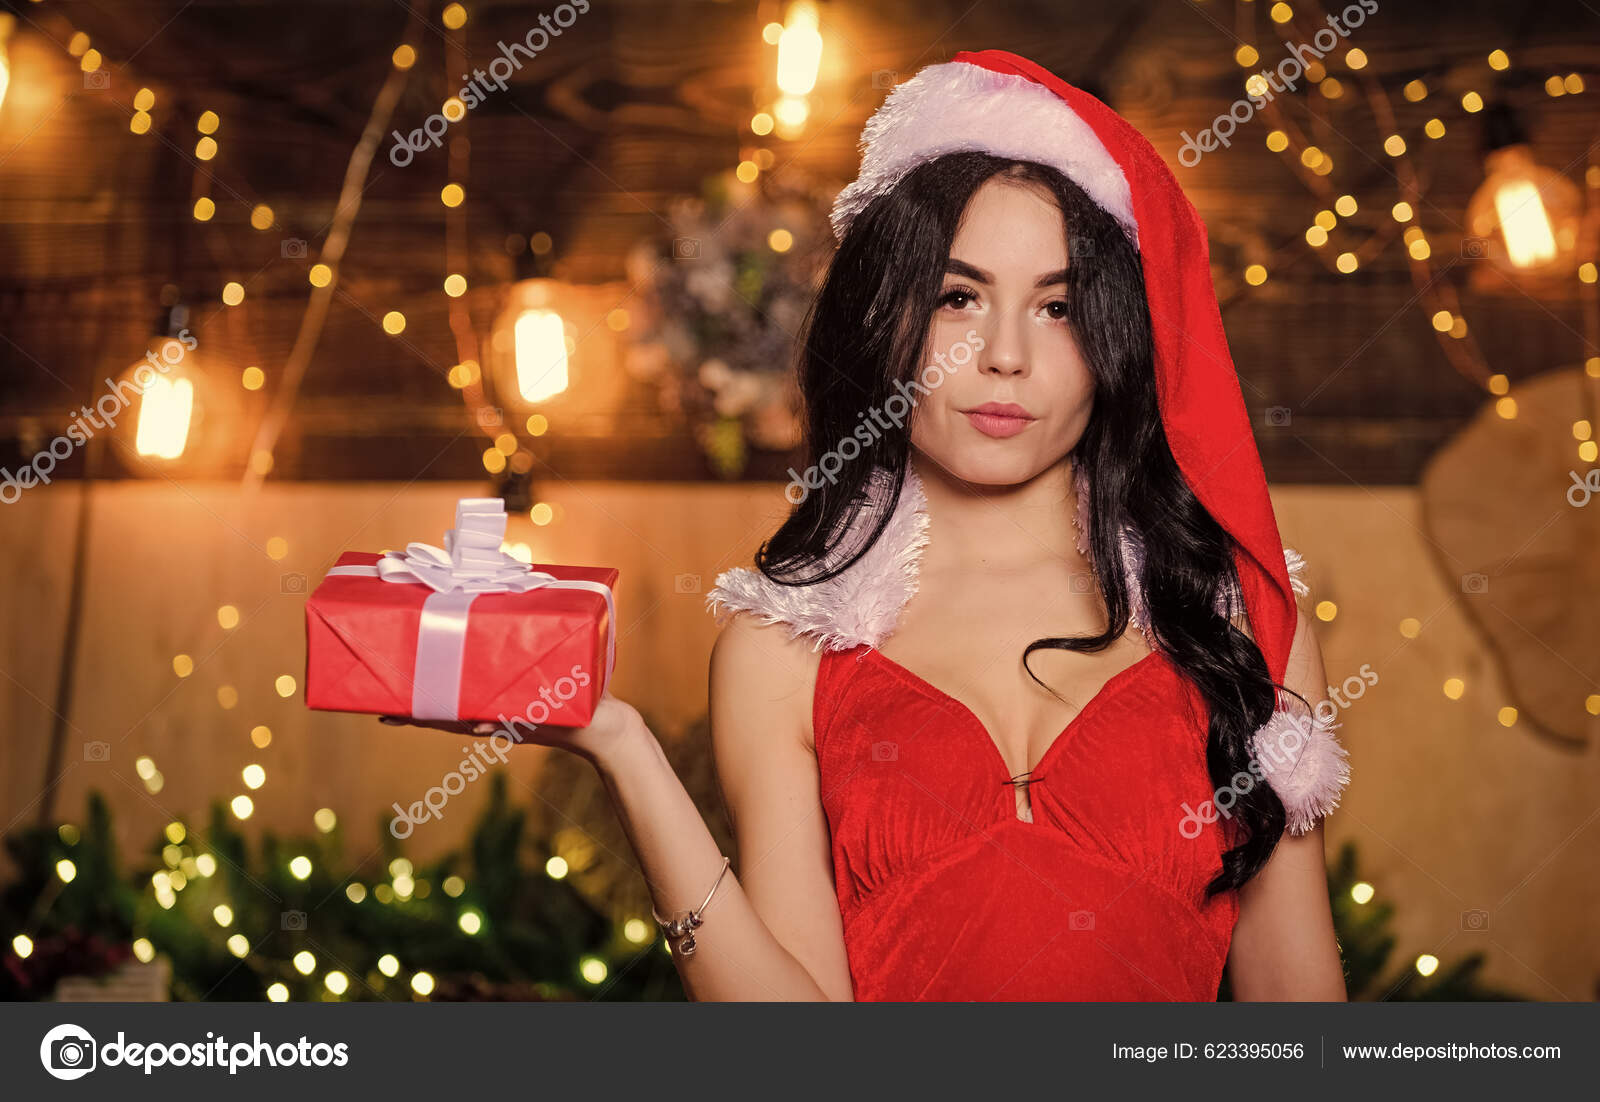 Sex Shop Attractive Girl Erotic Lingerie Hold Gift Box Woman Stock Photo by ©stetsik 623395056